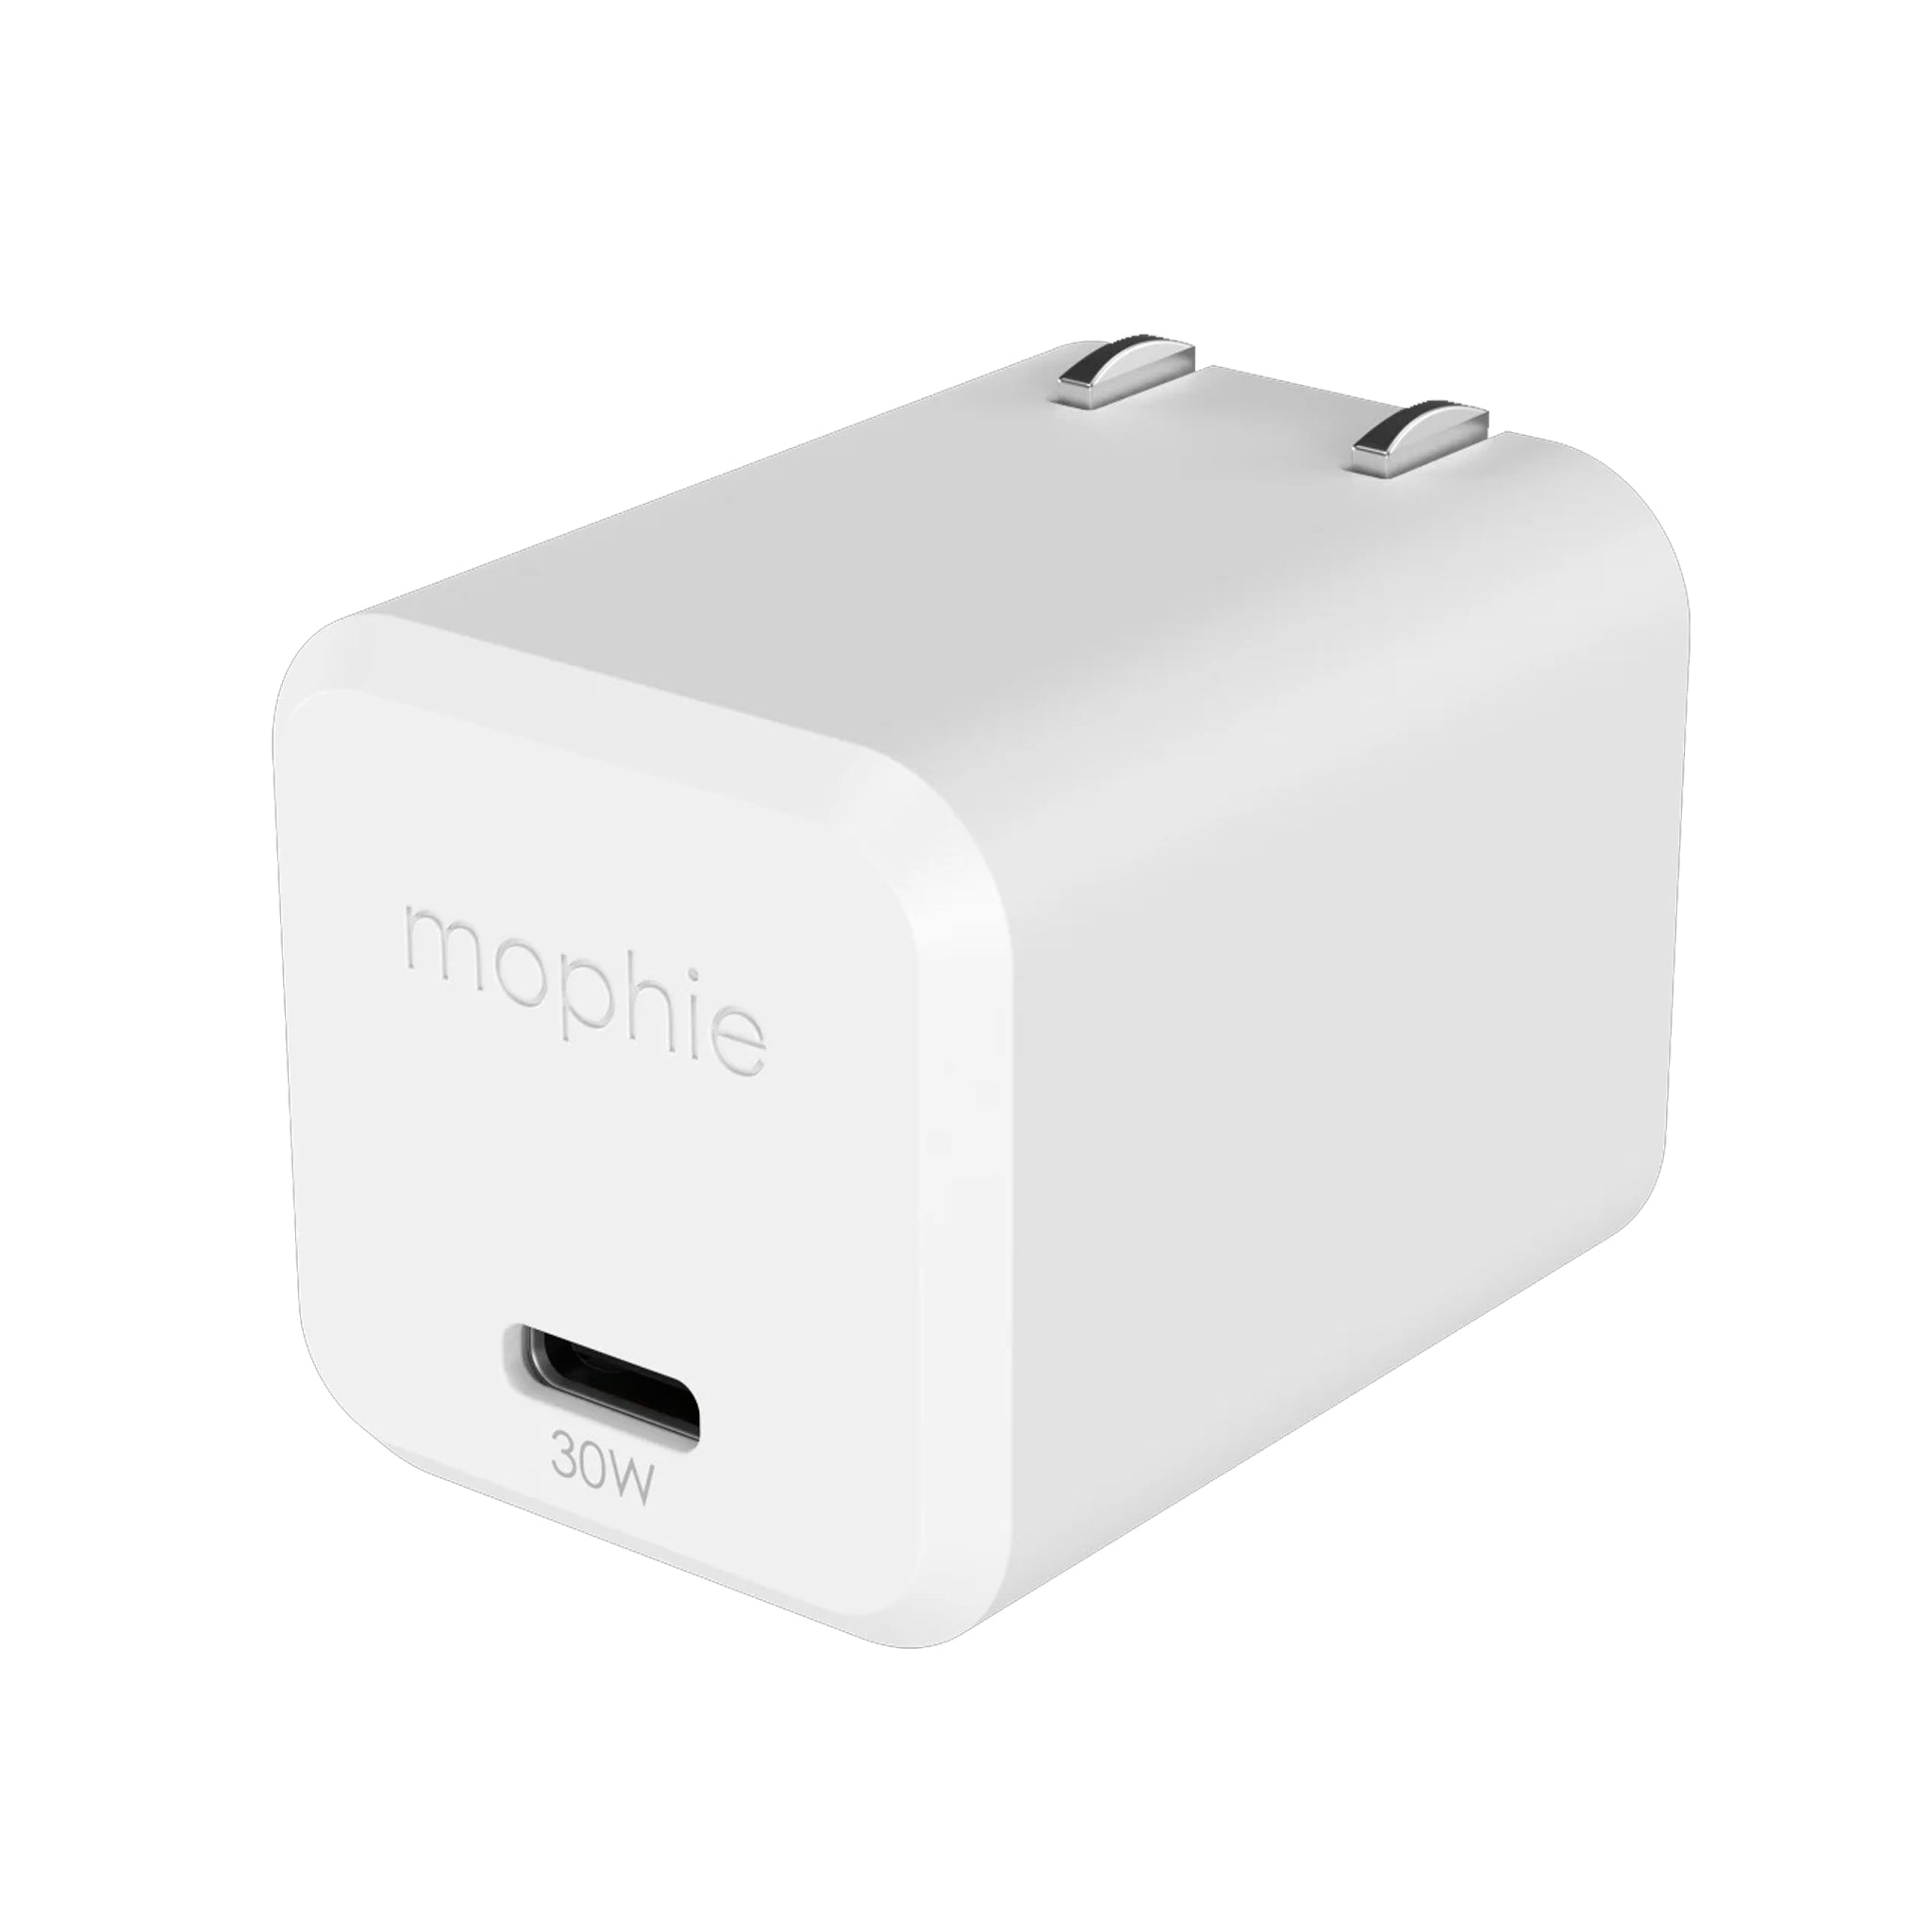 Mophie - Speedport 30 30w Gan Usb C Pd Wall Charger - White